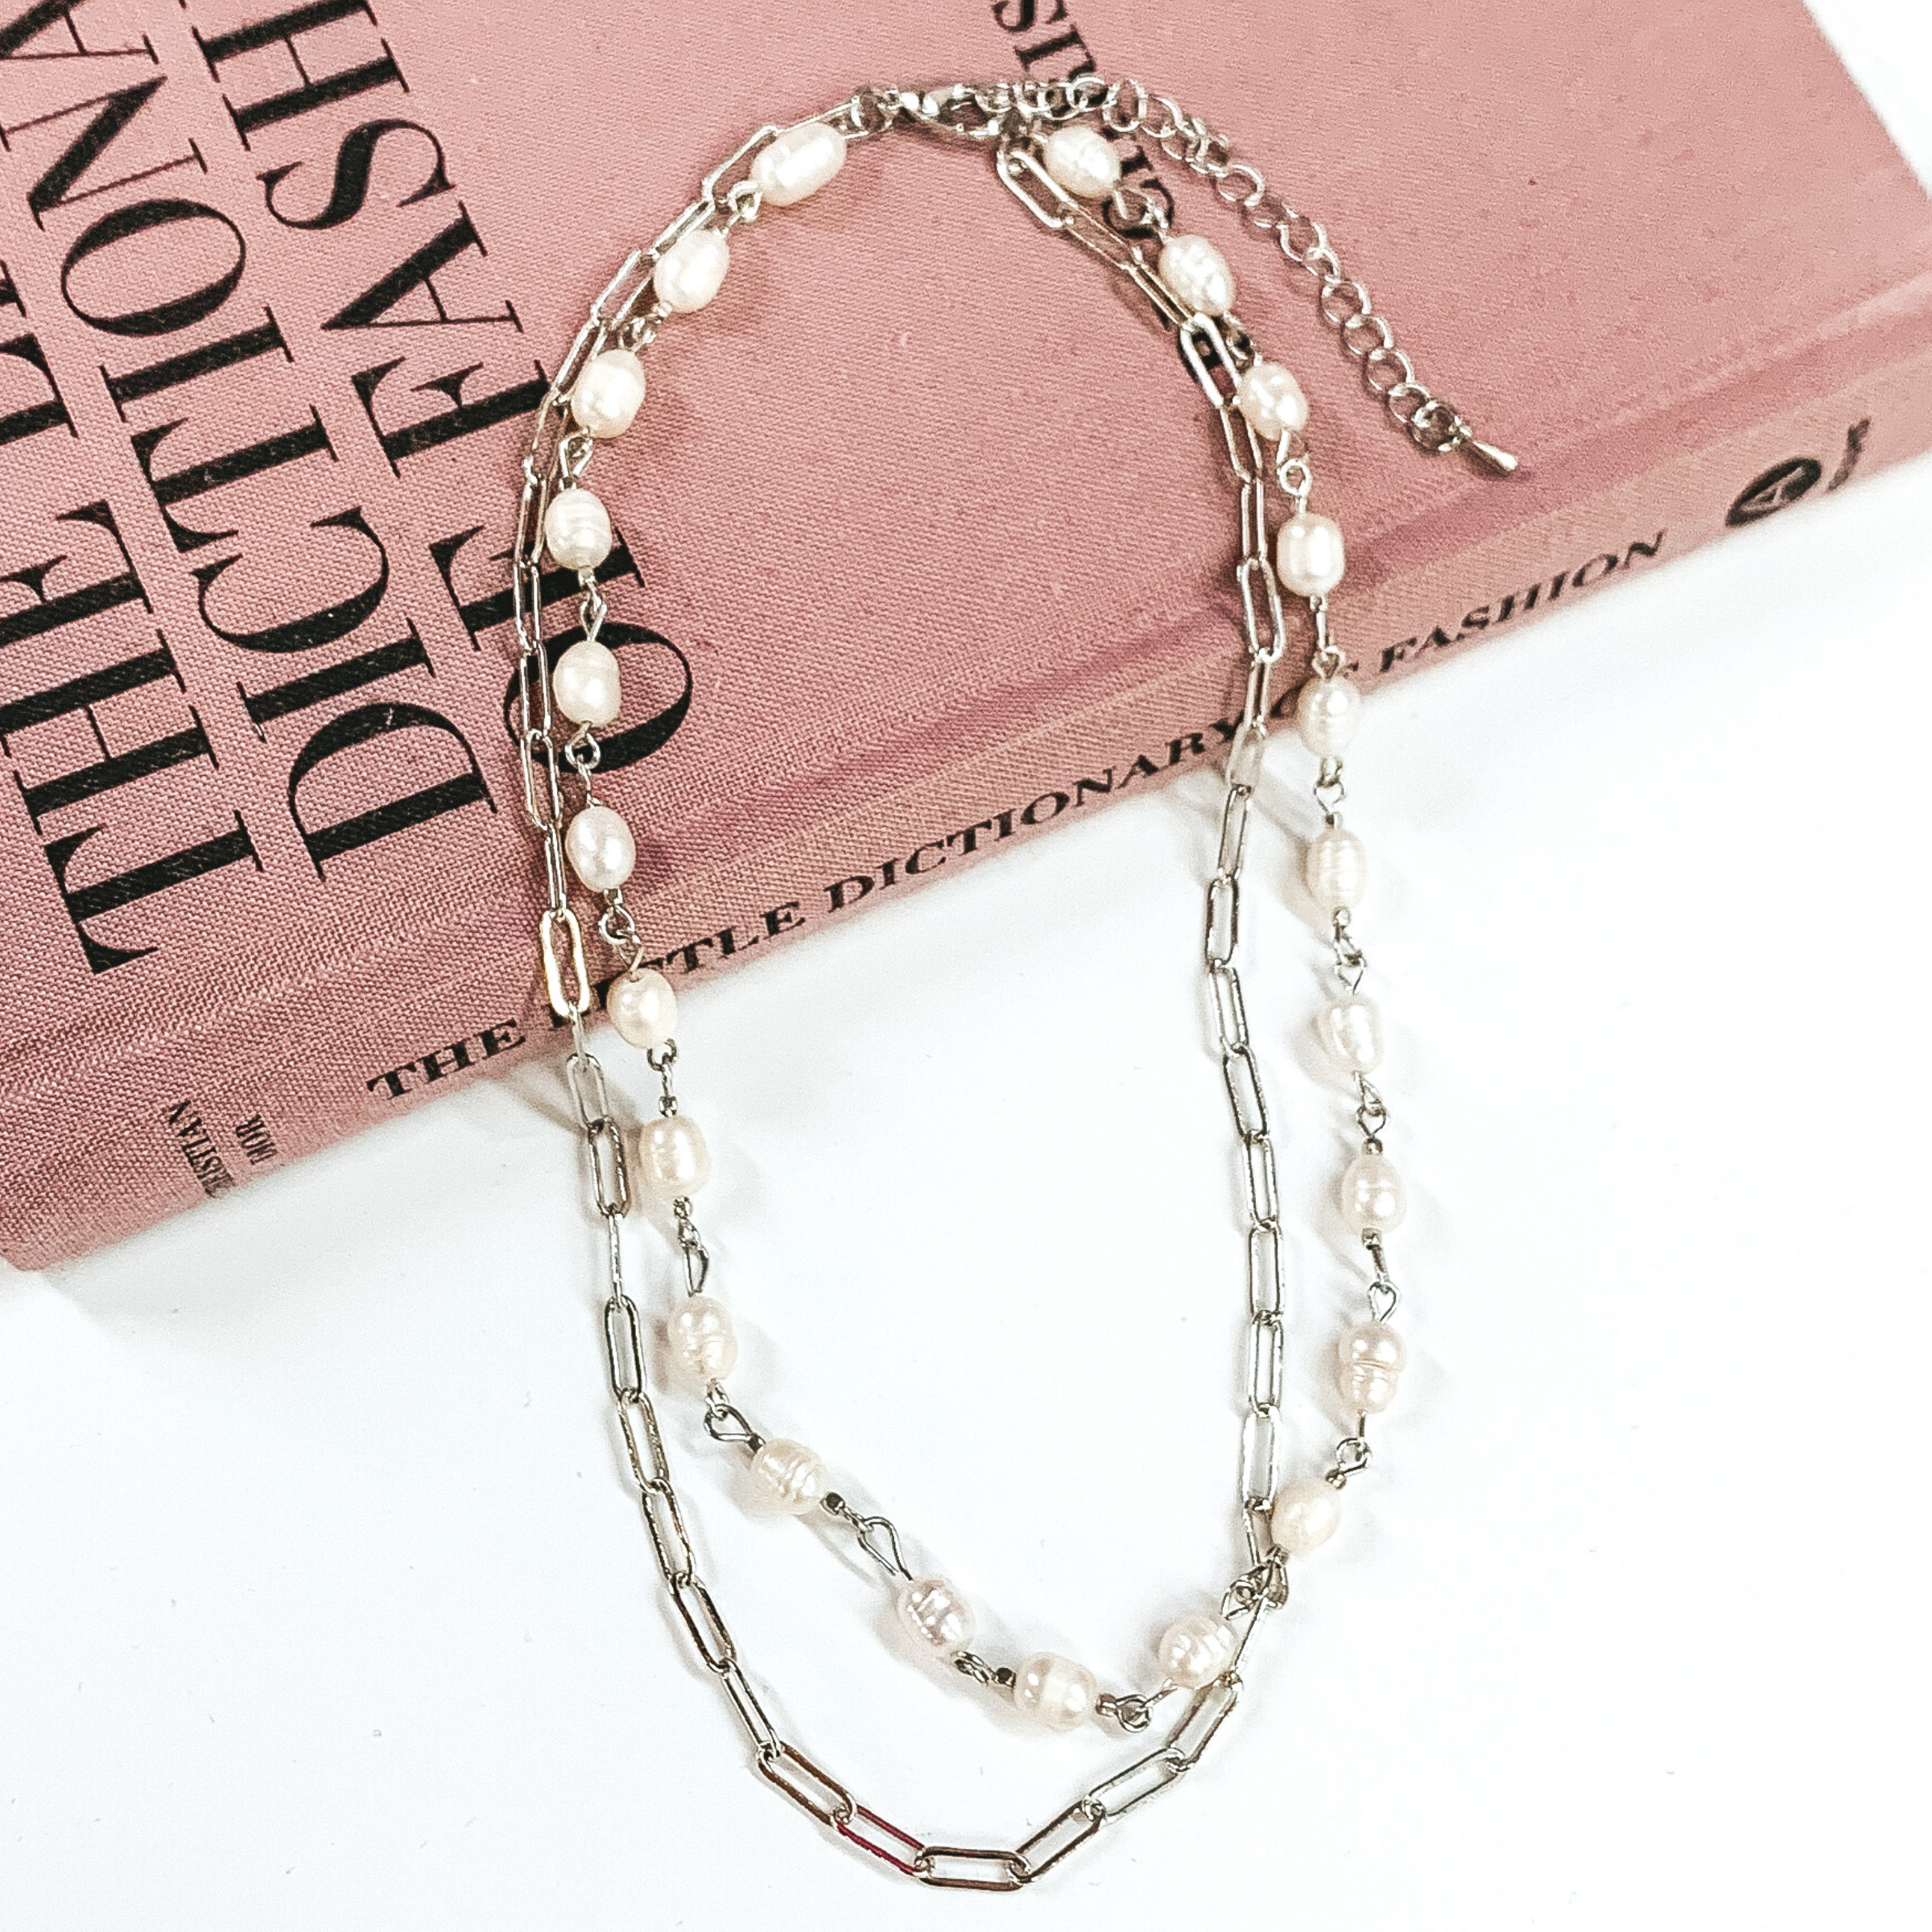 Silver, double layered necklace. One strand is a silver paperclip chain and the second strand is a white pearl beaded linked chain. This necklace is pictured laying partially on a mauve colored book on a white background. 